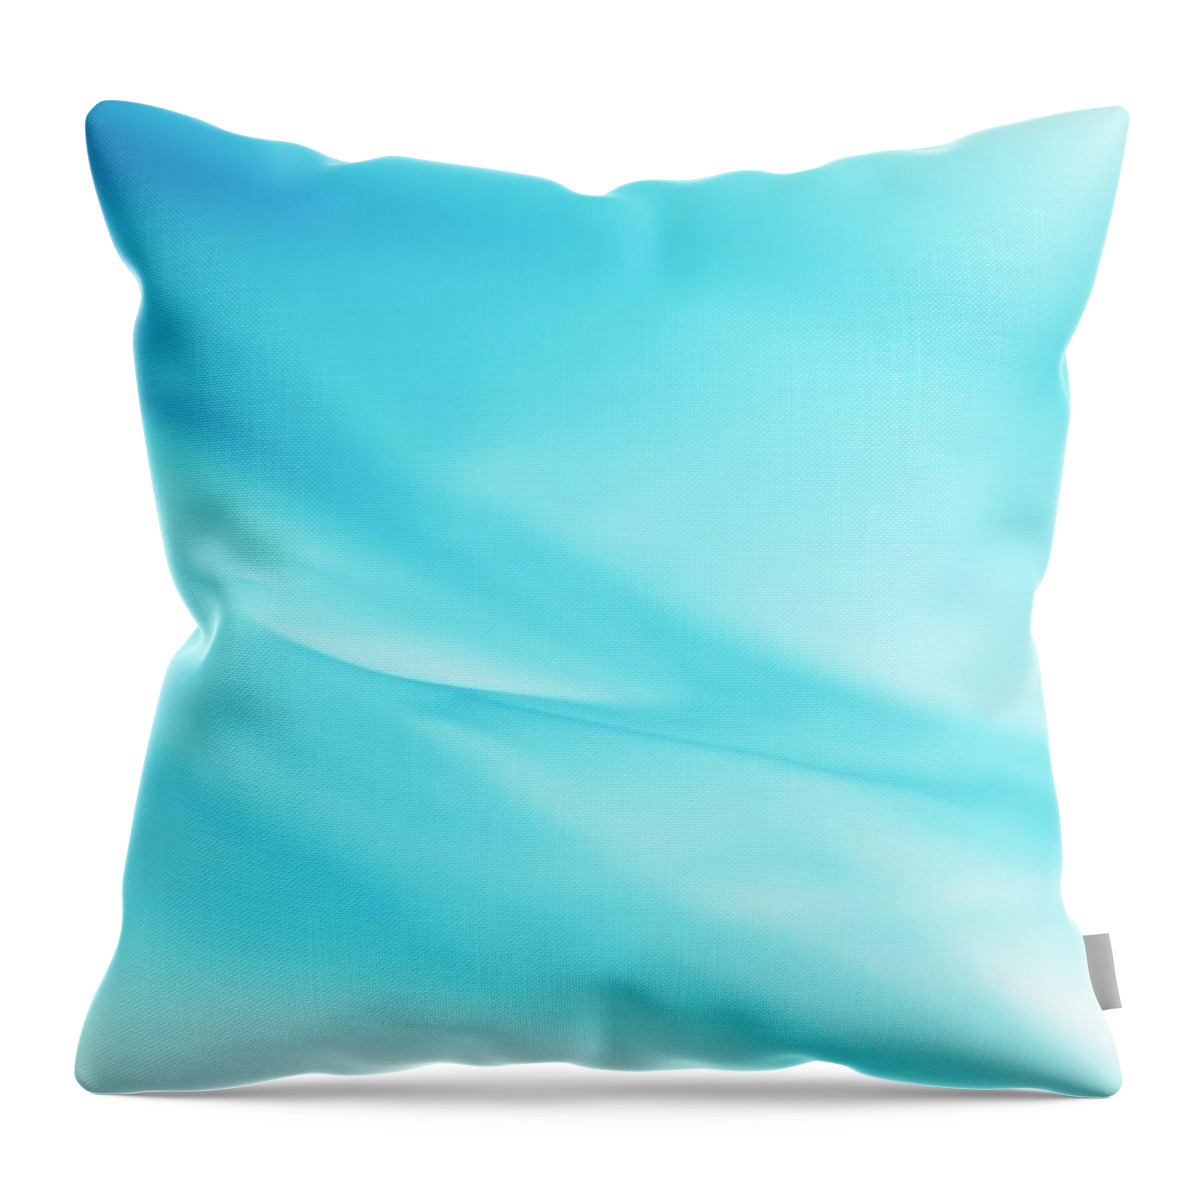 Transparent Throw Pillow featuring the photograph Close-up Of Water Surface by Imagewerks